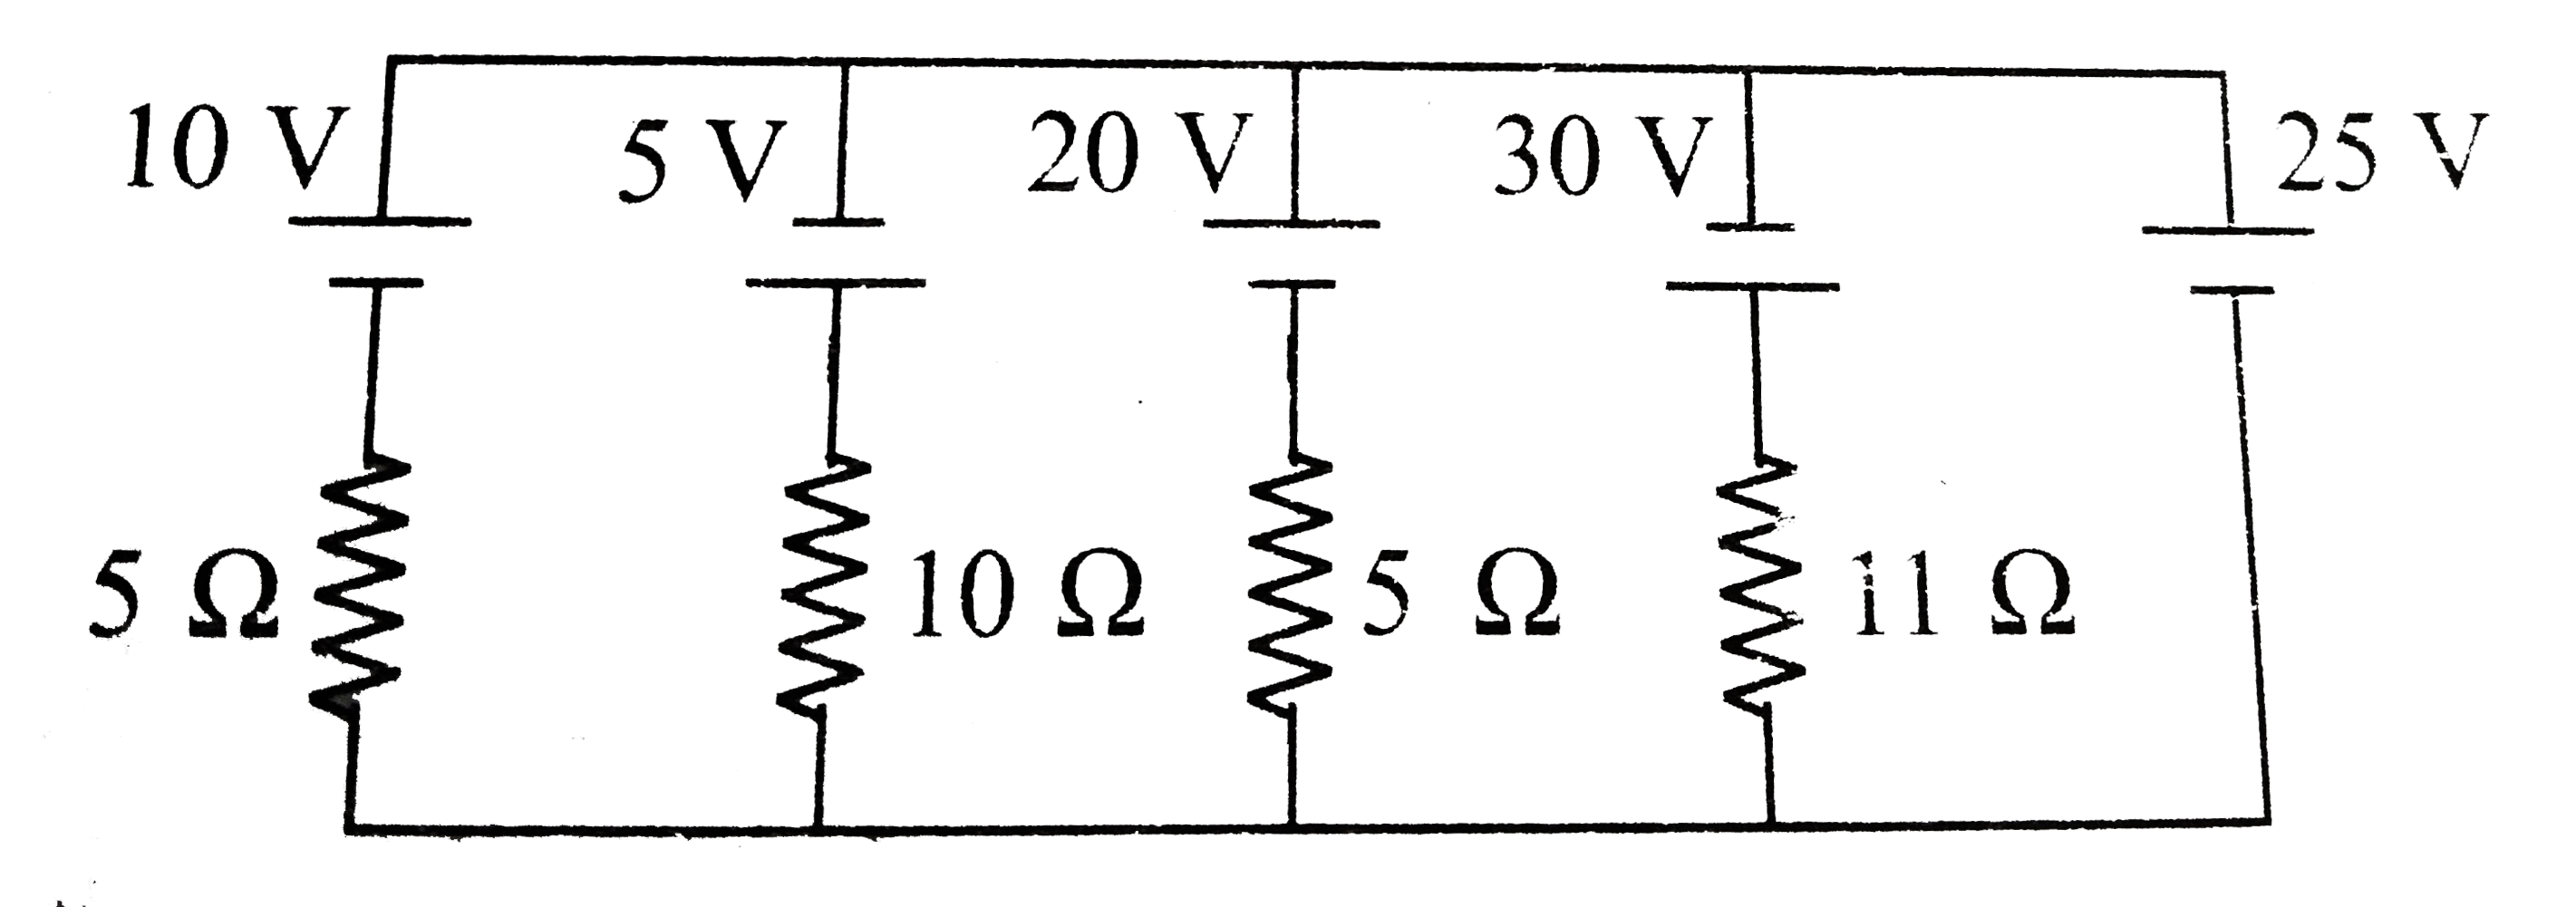 In the circuit shown, current through 25V cell is